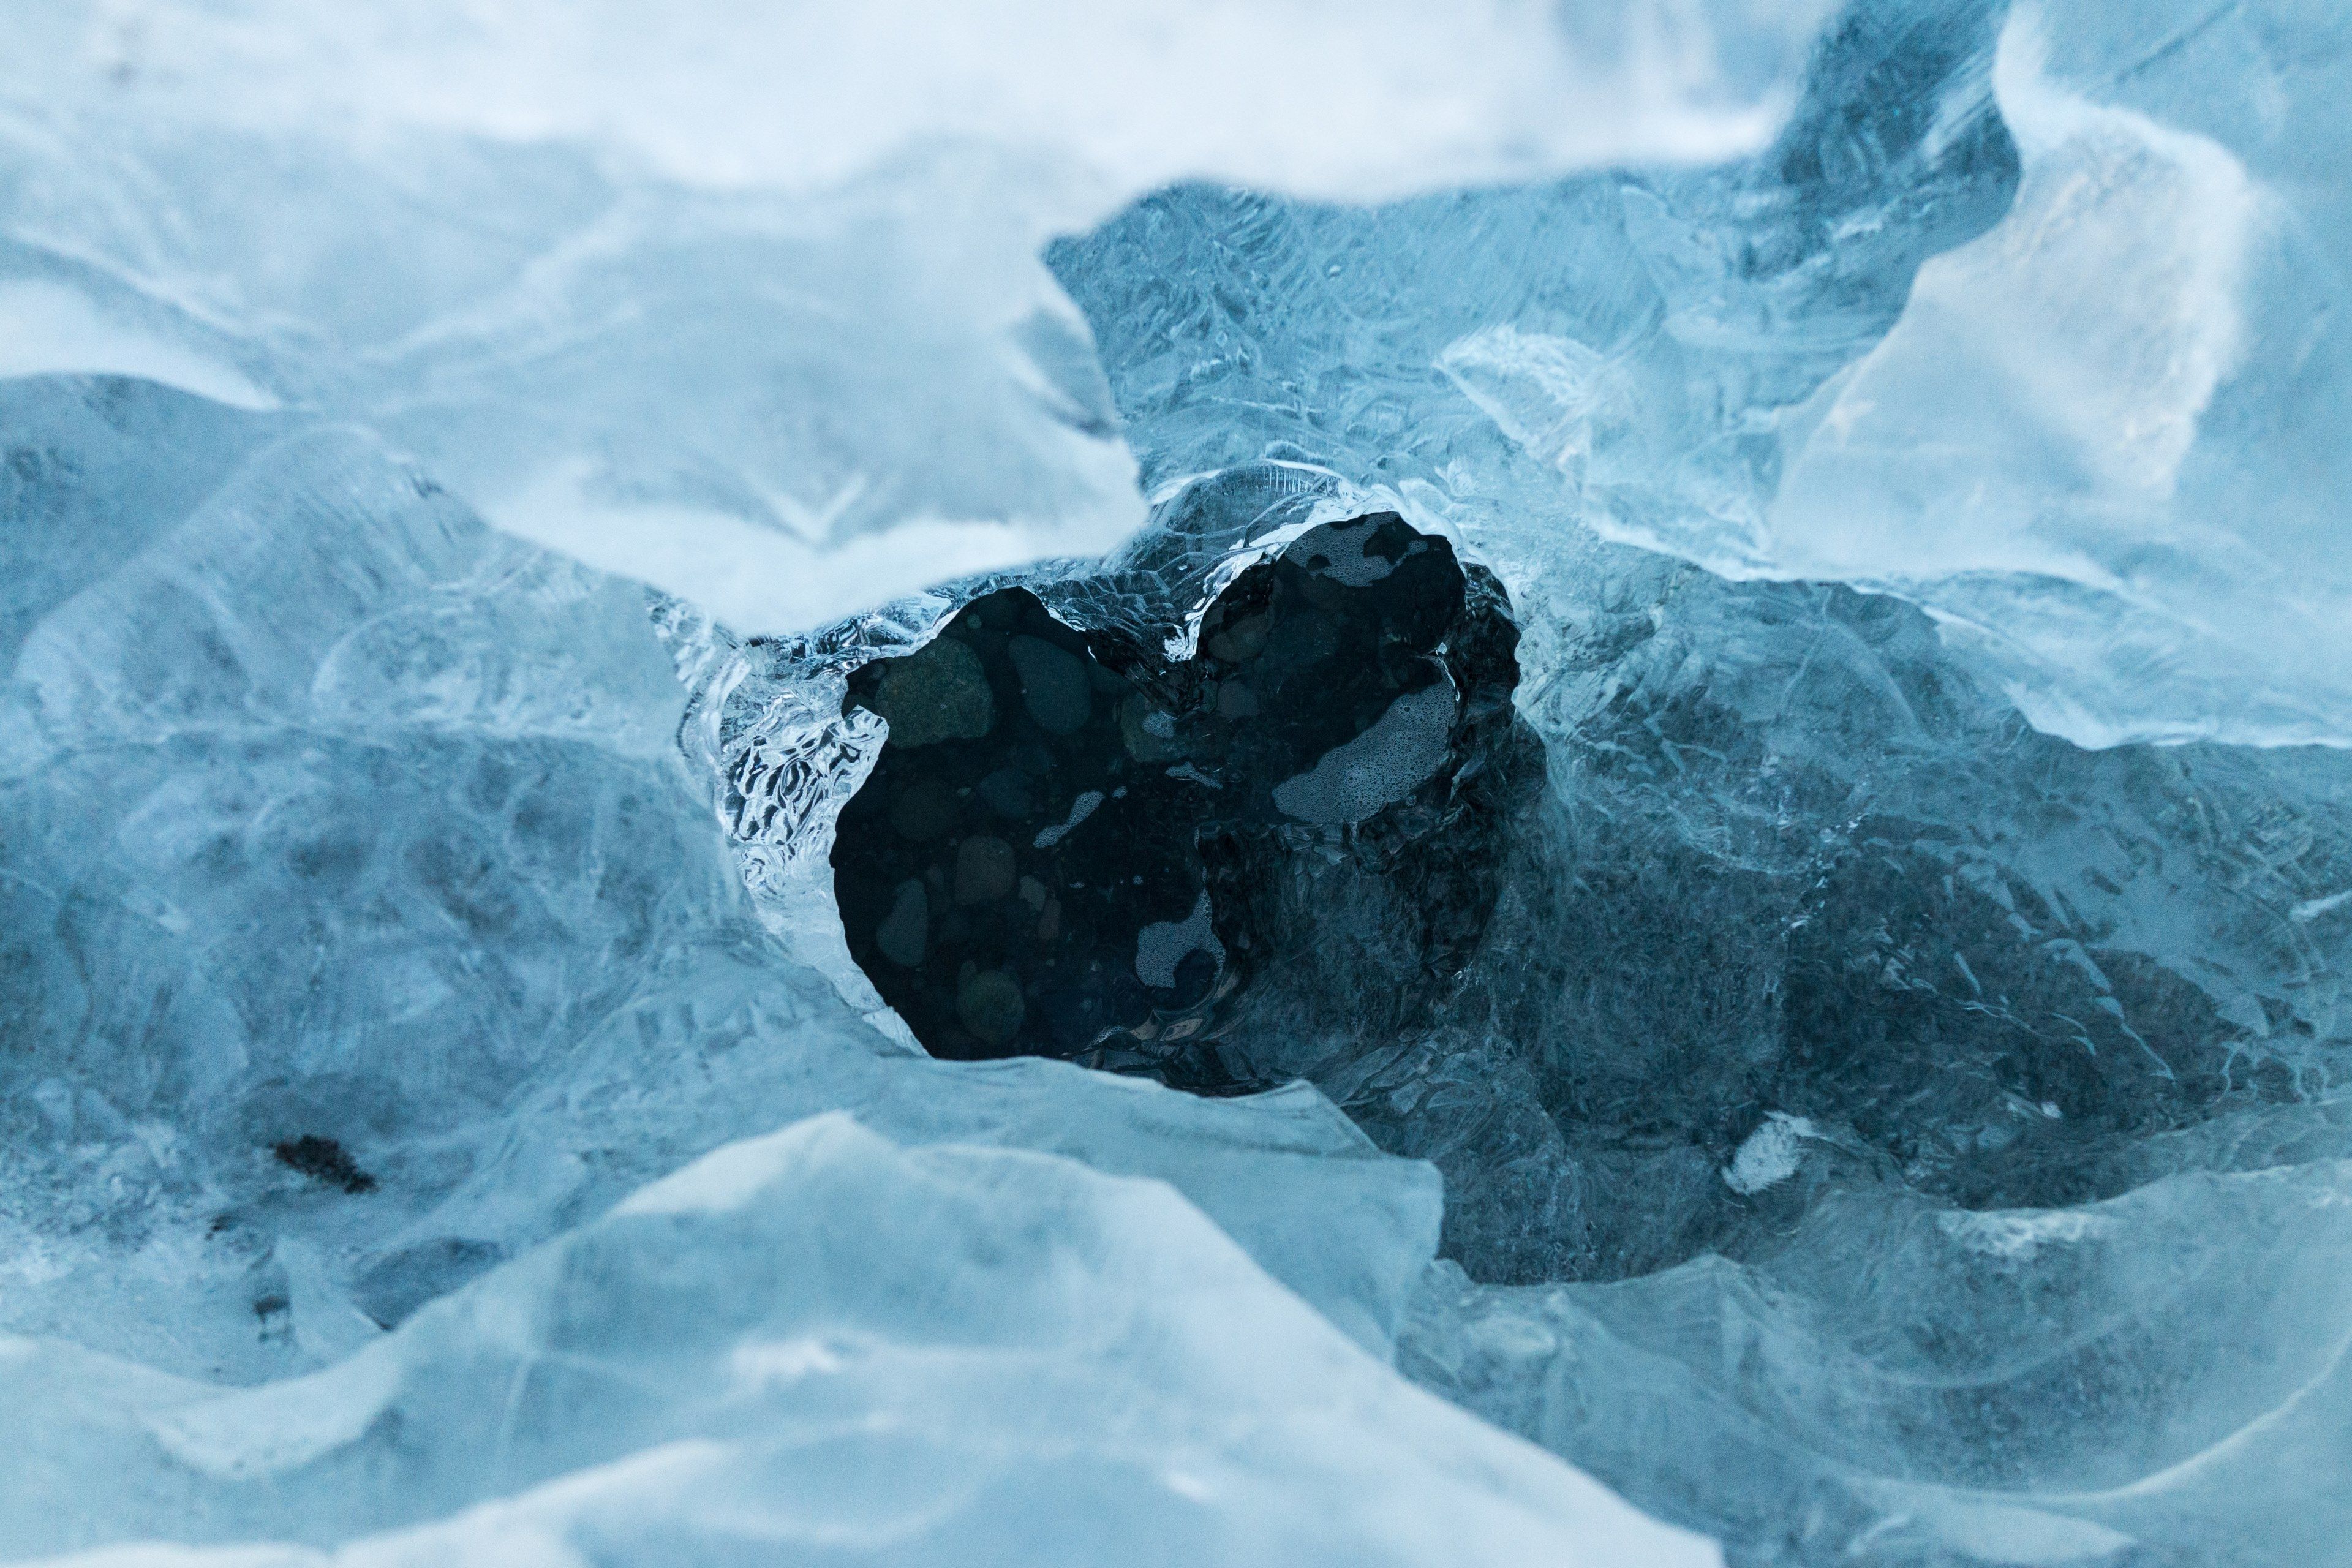 Wallpaper / a hole in an ice sheet covering dark blue water, shattered ice over water 4k wallpaper free download